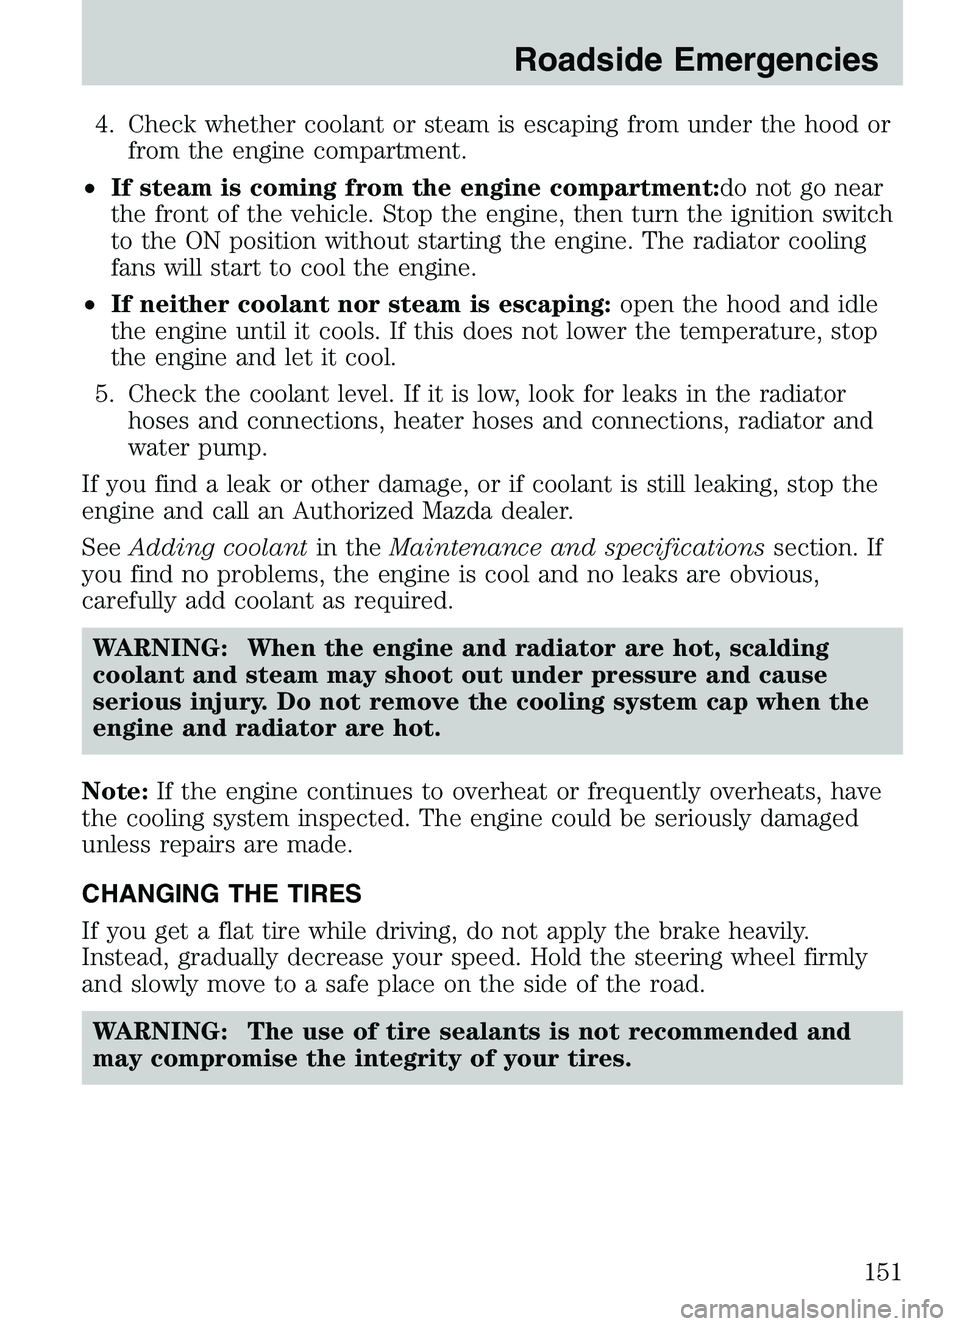 MAZDA MODEL B4000 2003  Owners Manual 4. Check whether coolant or steam is escaping from under the hood orfrom the engine compartment.
• If steam is coming from the engine compartment:do not go near
the front of the vehicle. Stop the en